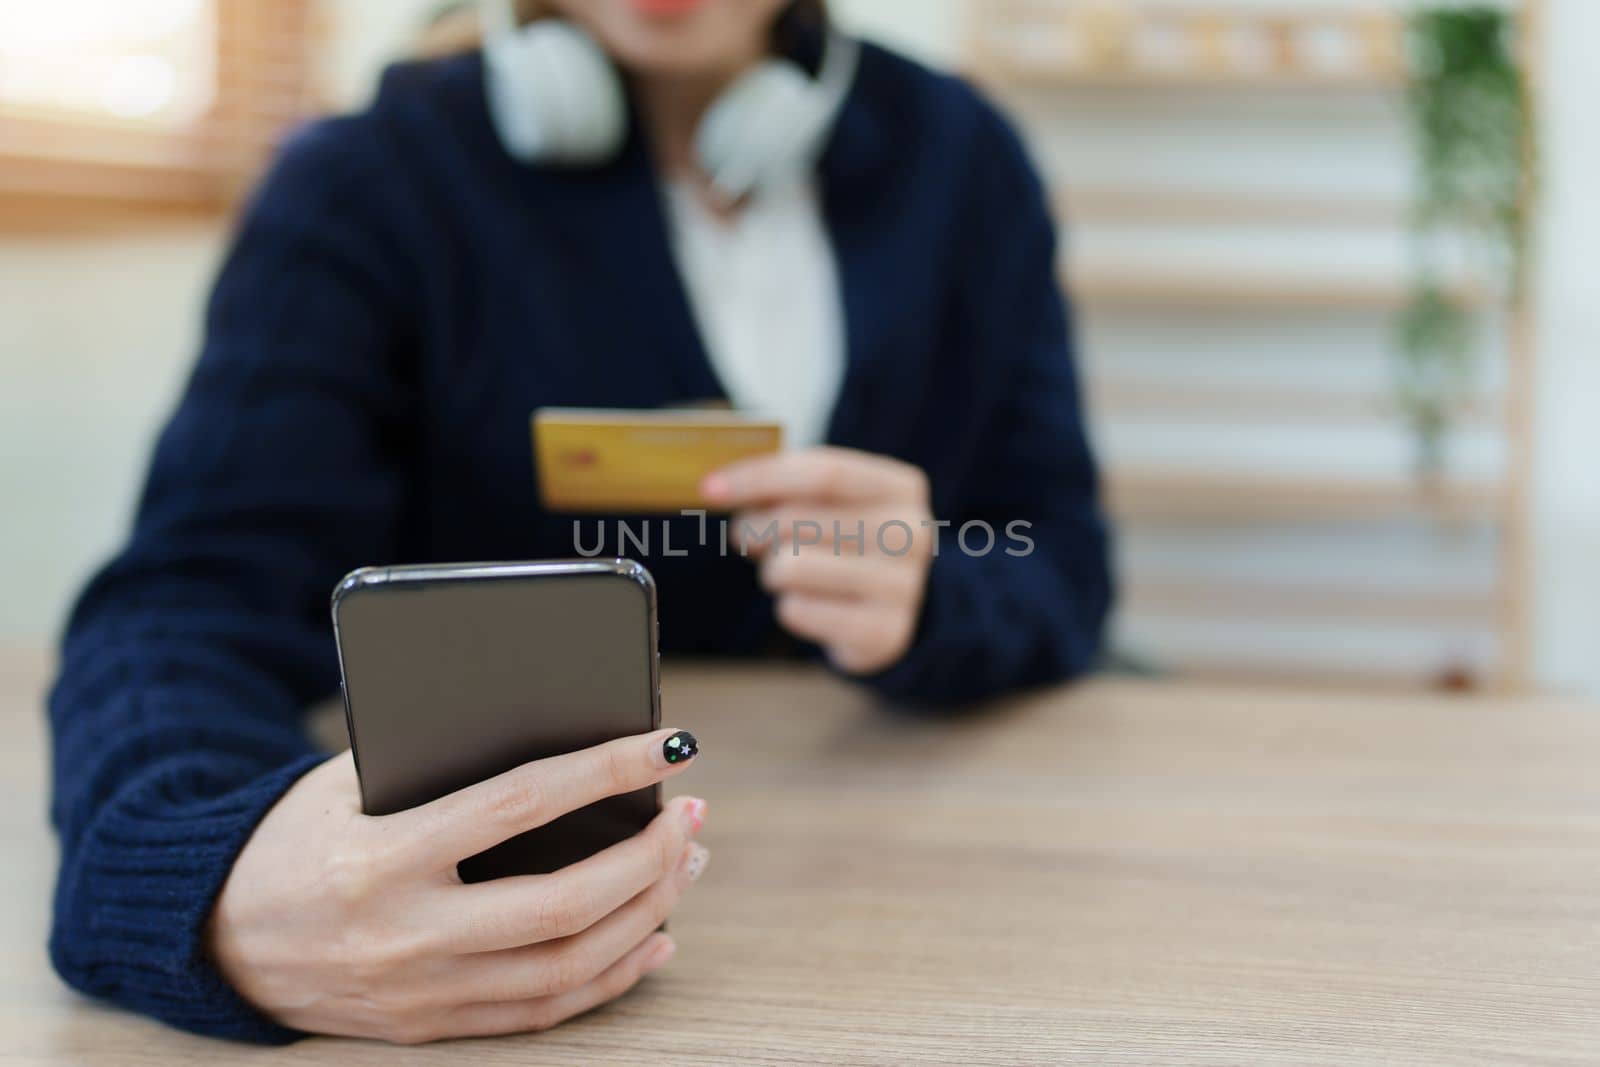 Online Shopping and Internet Payments, Asian man are using their credit card and mobile phone to shop online or conduct errands in the digital world. by Manastrong